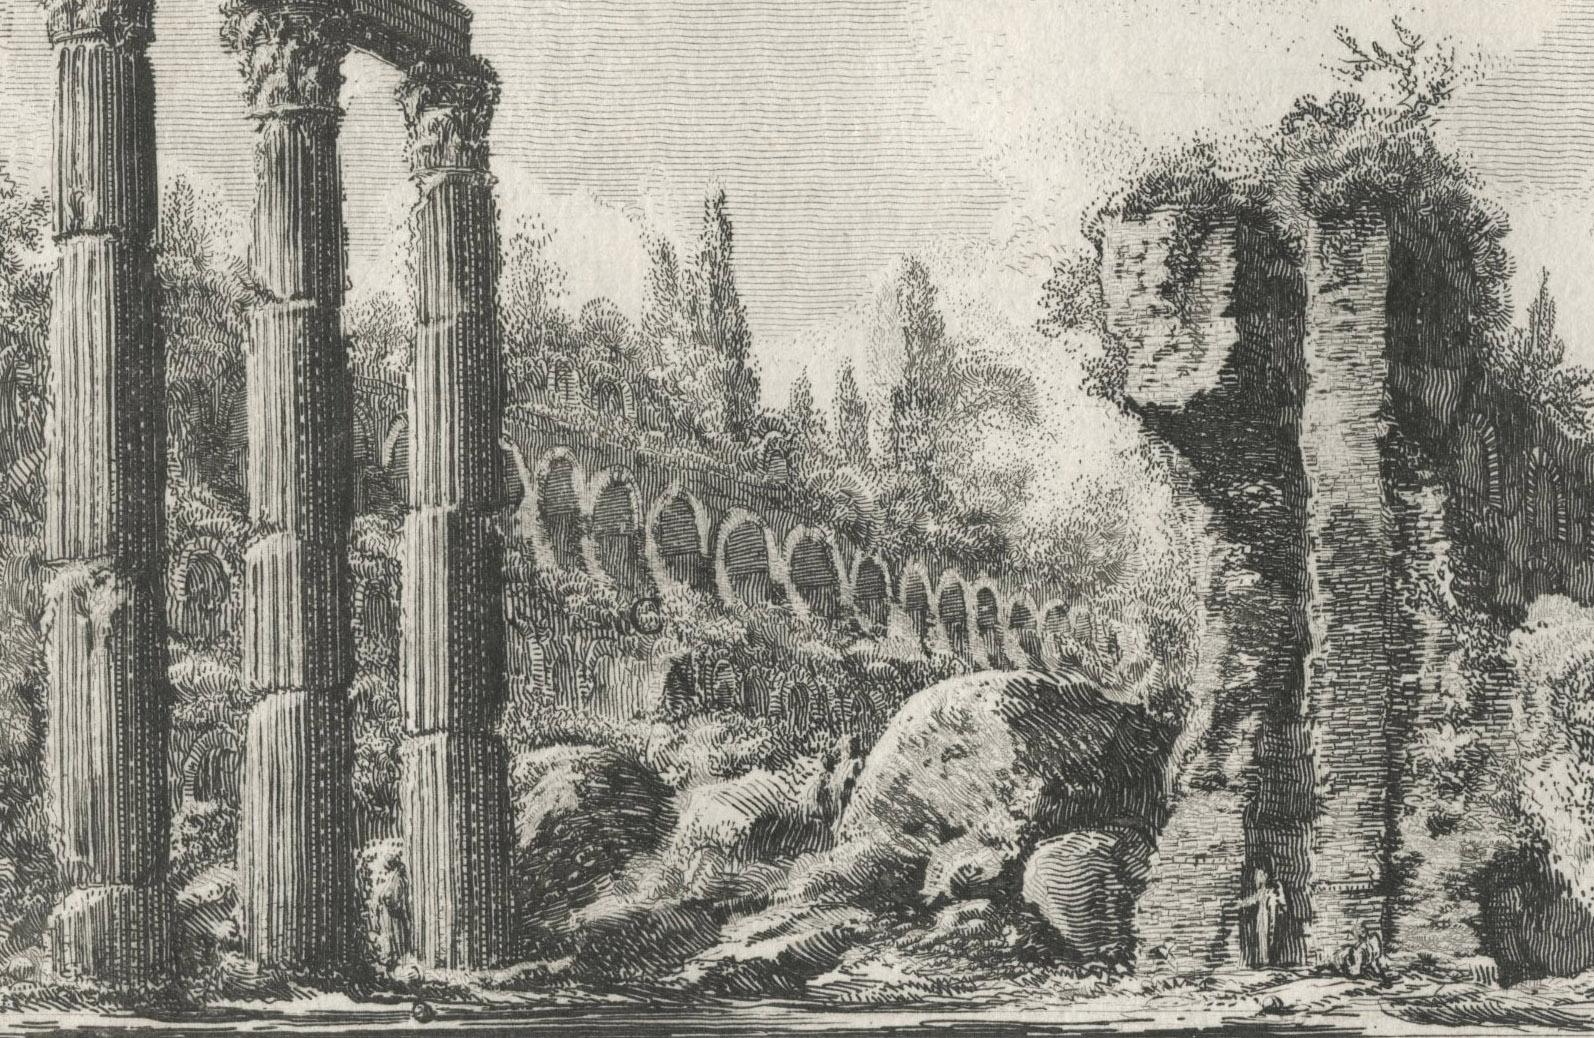 XXXIII Fig. I Avanzo del Tempio di Castore e Polluce .View of the Remains of the Peristyle of the House of Nero,
Etching, 1756
Signed in the plate (see photo)
From: Le Antichità Romane (Roman Antiquity), 1756-1757, Four Volumes
From the first